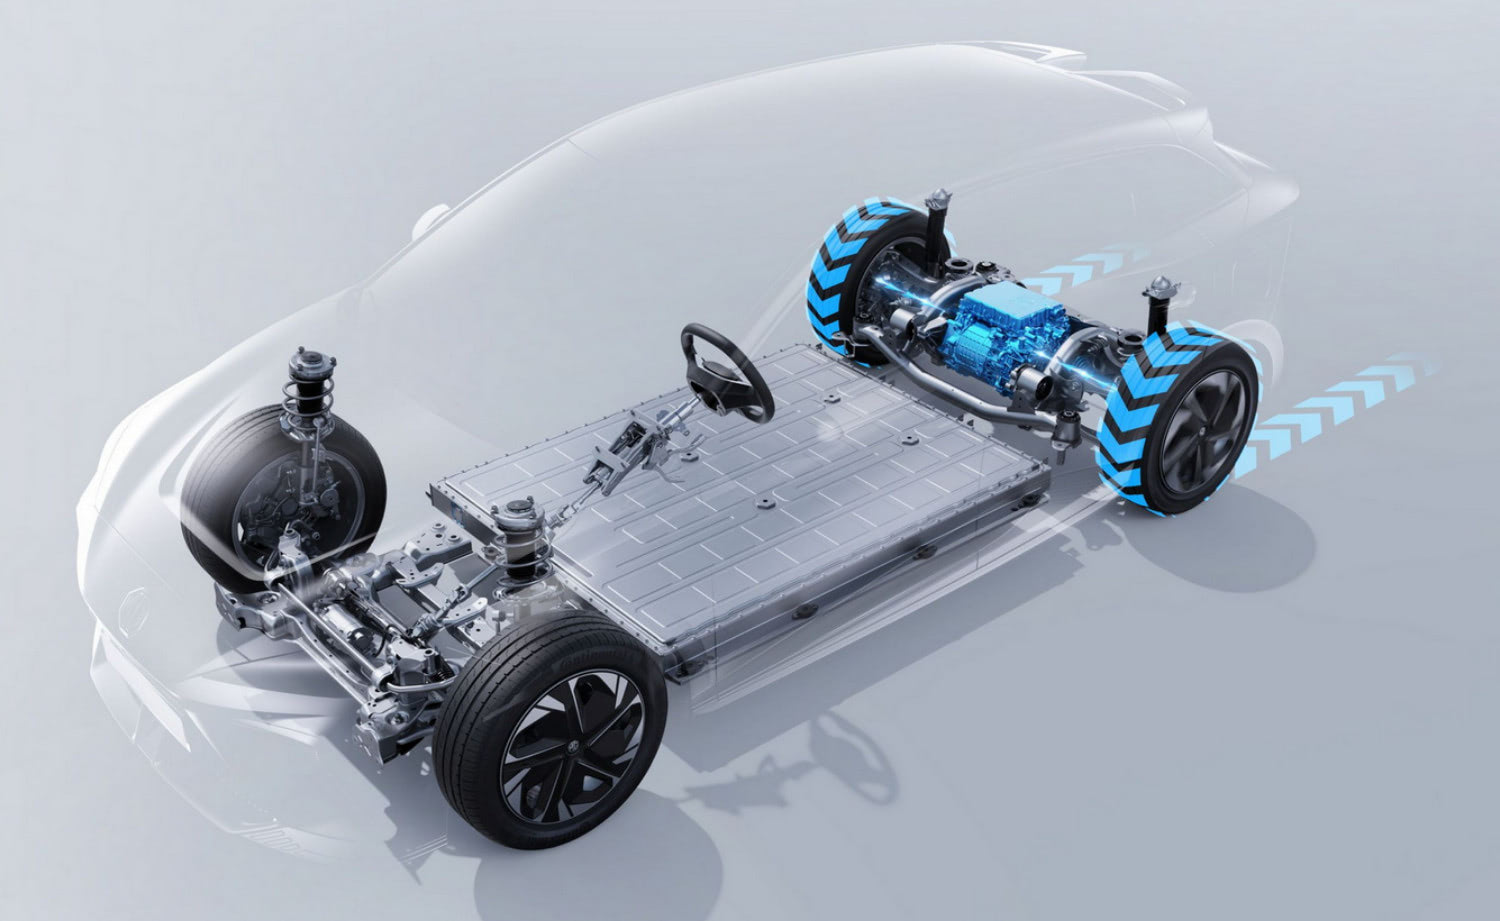 Although initially proposed with rear-wheel drive only, the new MSP platform also supports all-wheel drive solutions.